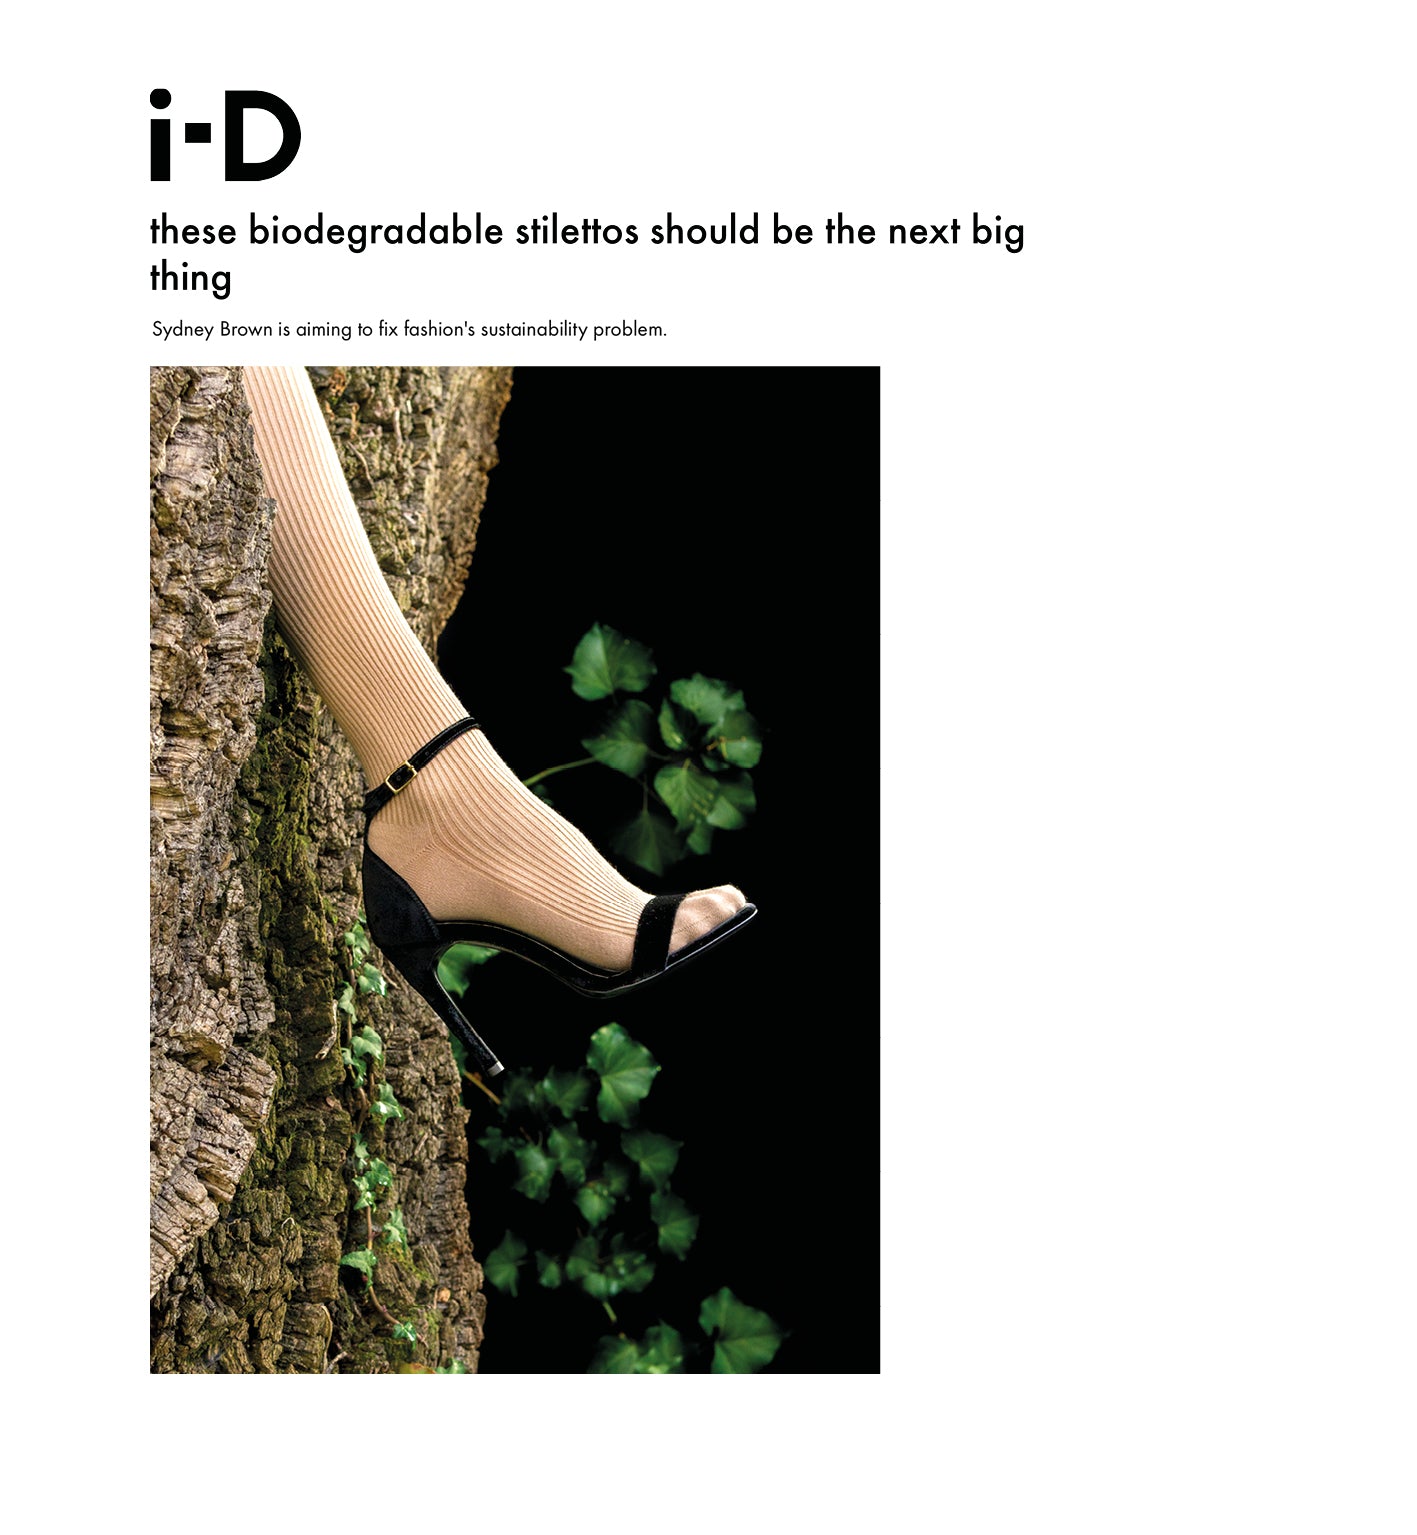 I-D Magazine interviews Sydney Brown about the new biodegradable stilettos in AW18